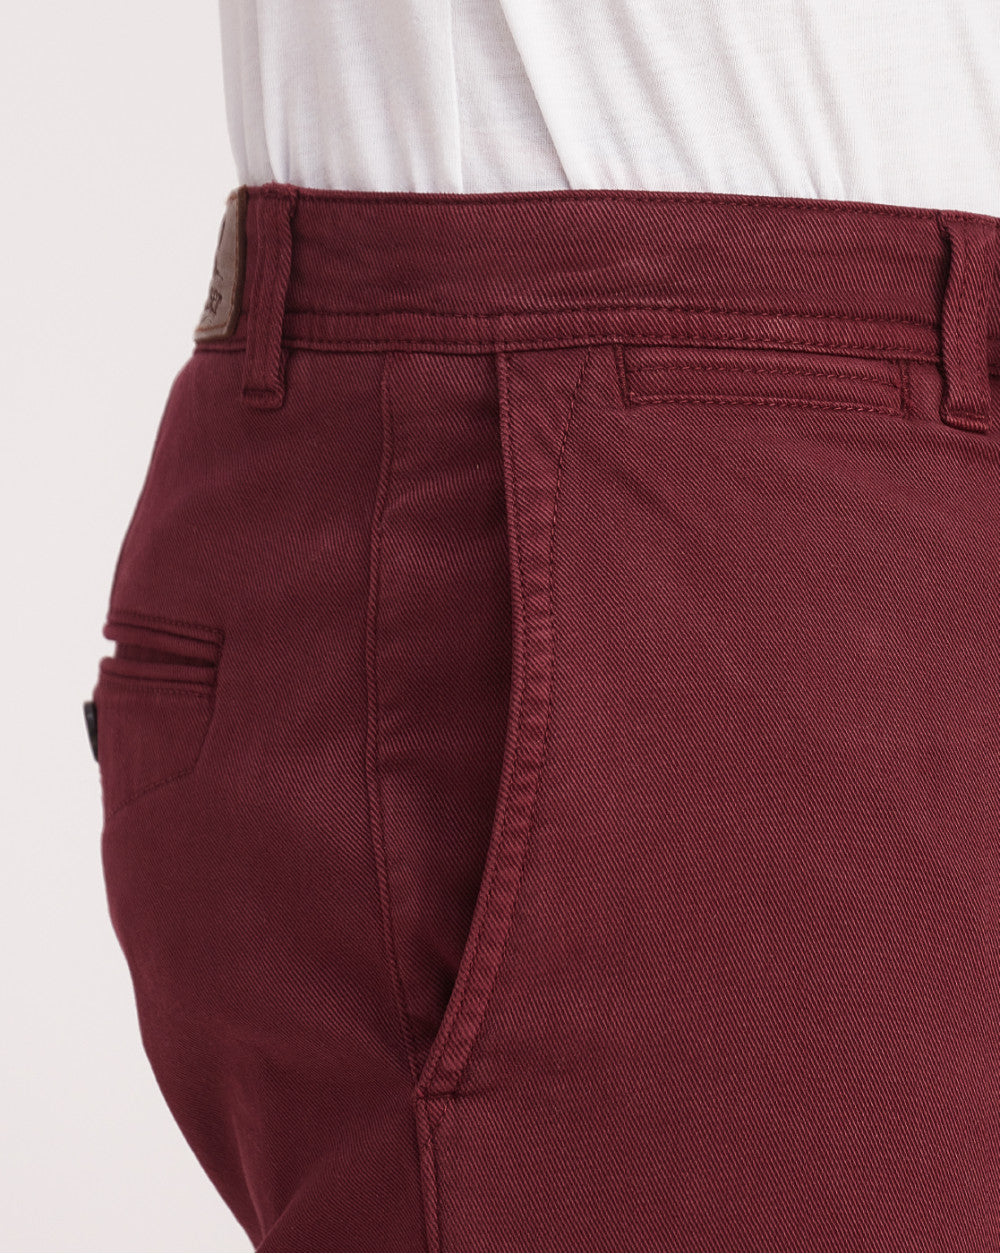 Slim Fit Garment Dyed Chinos - Maroon